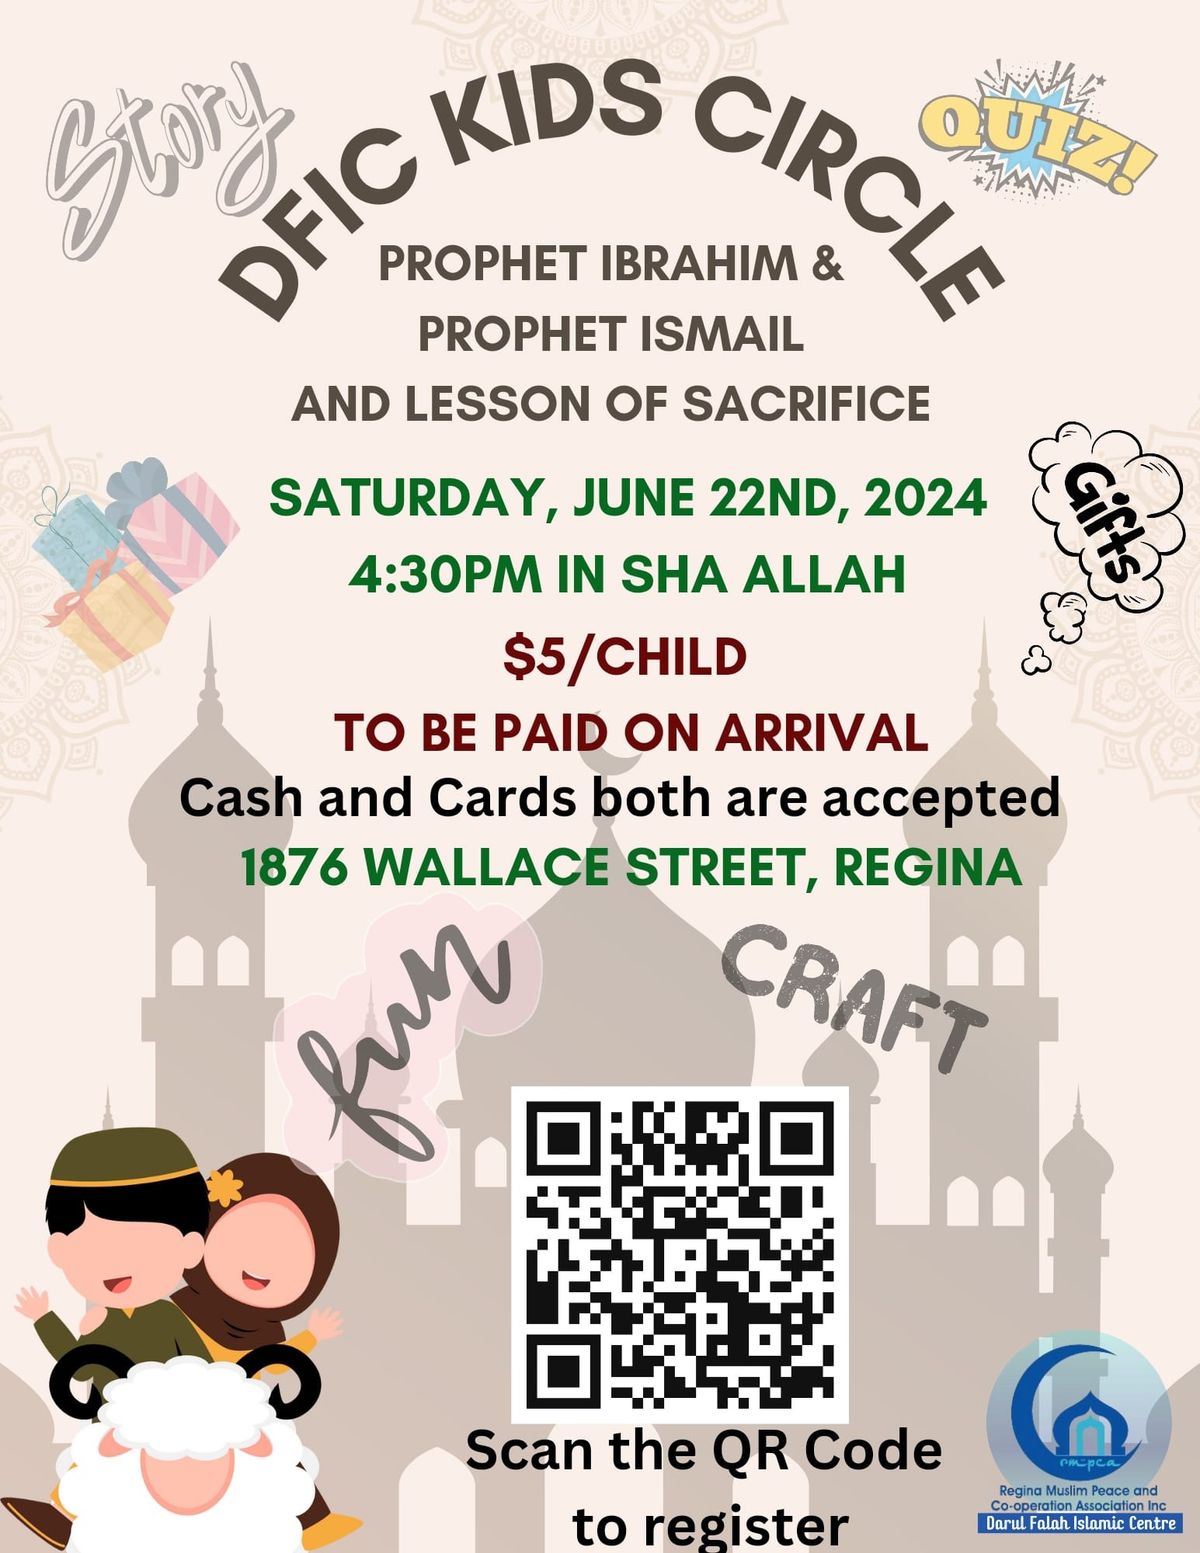 DFIC Kids Circle: Learn about Prophet IBRAHIM AS & Prophet ISMAIL AS